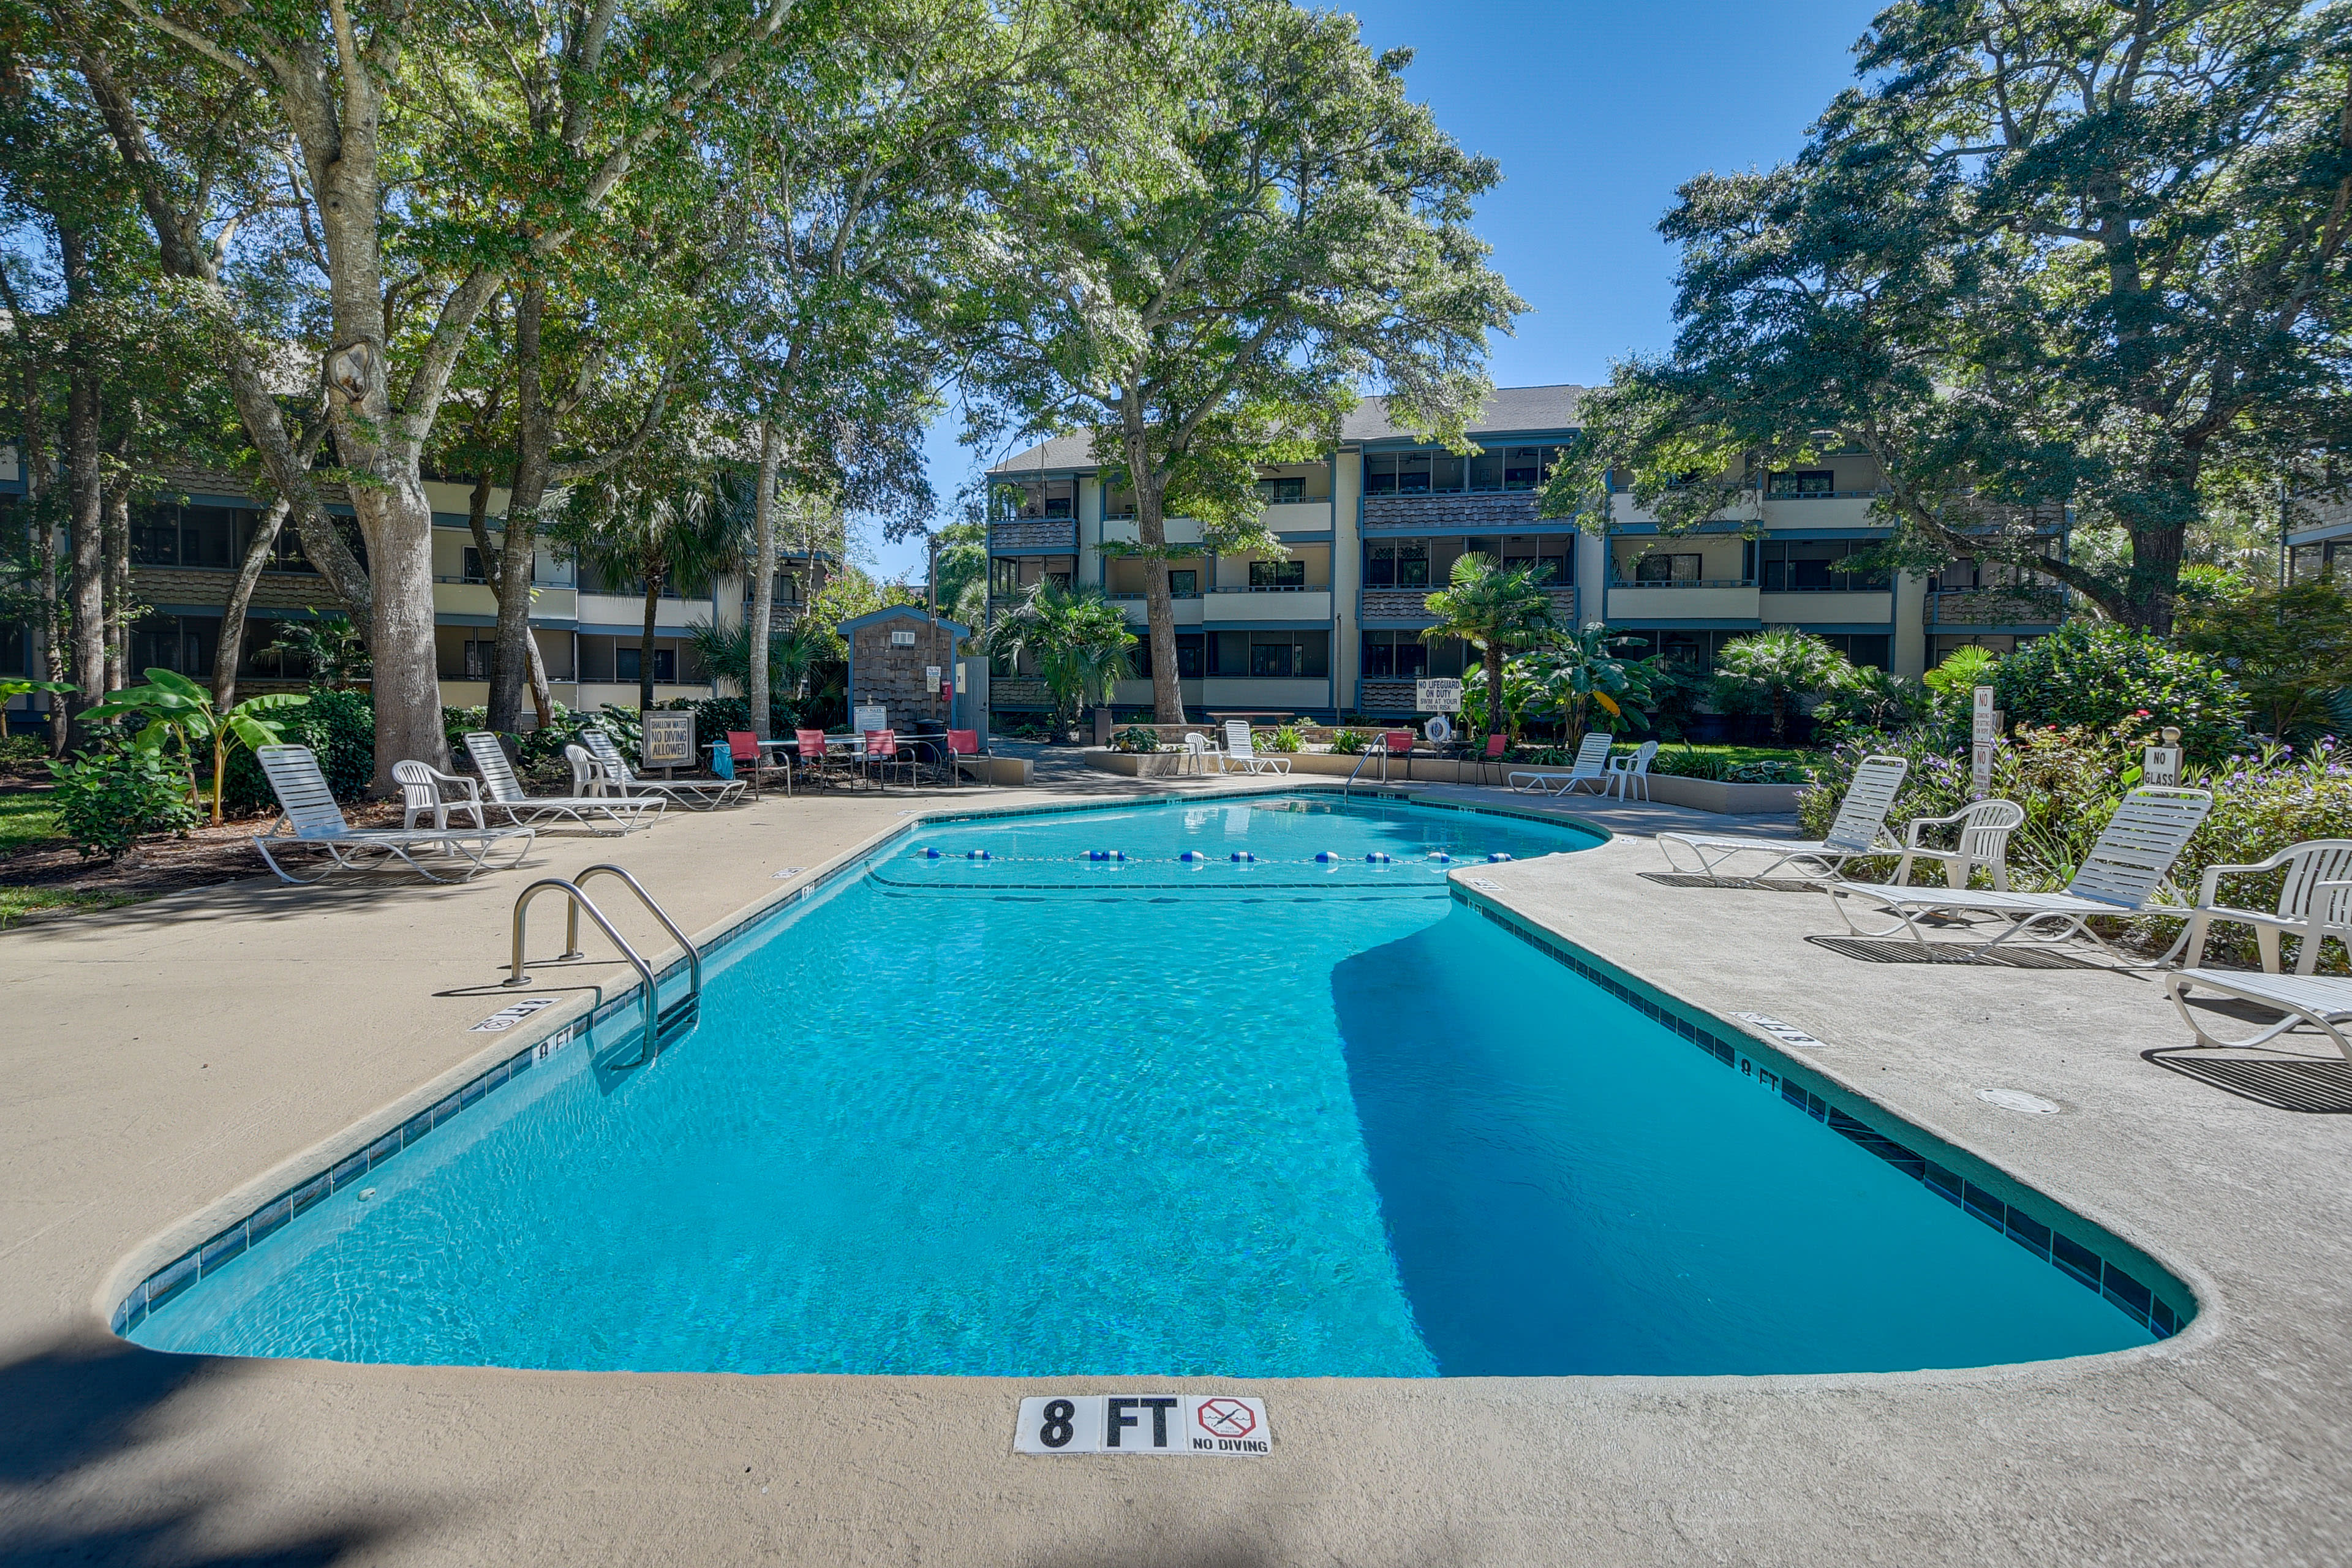 Community Amenities | Outdoor Pool | Sun Deck | Lounge Chairs | Dining Areas